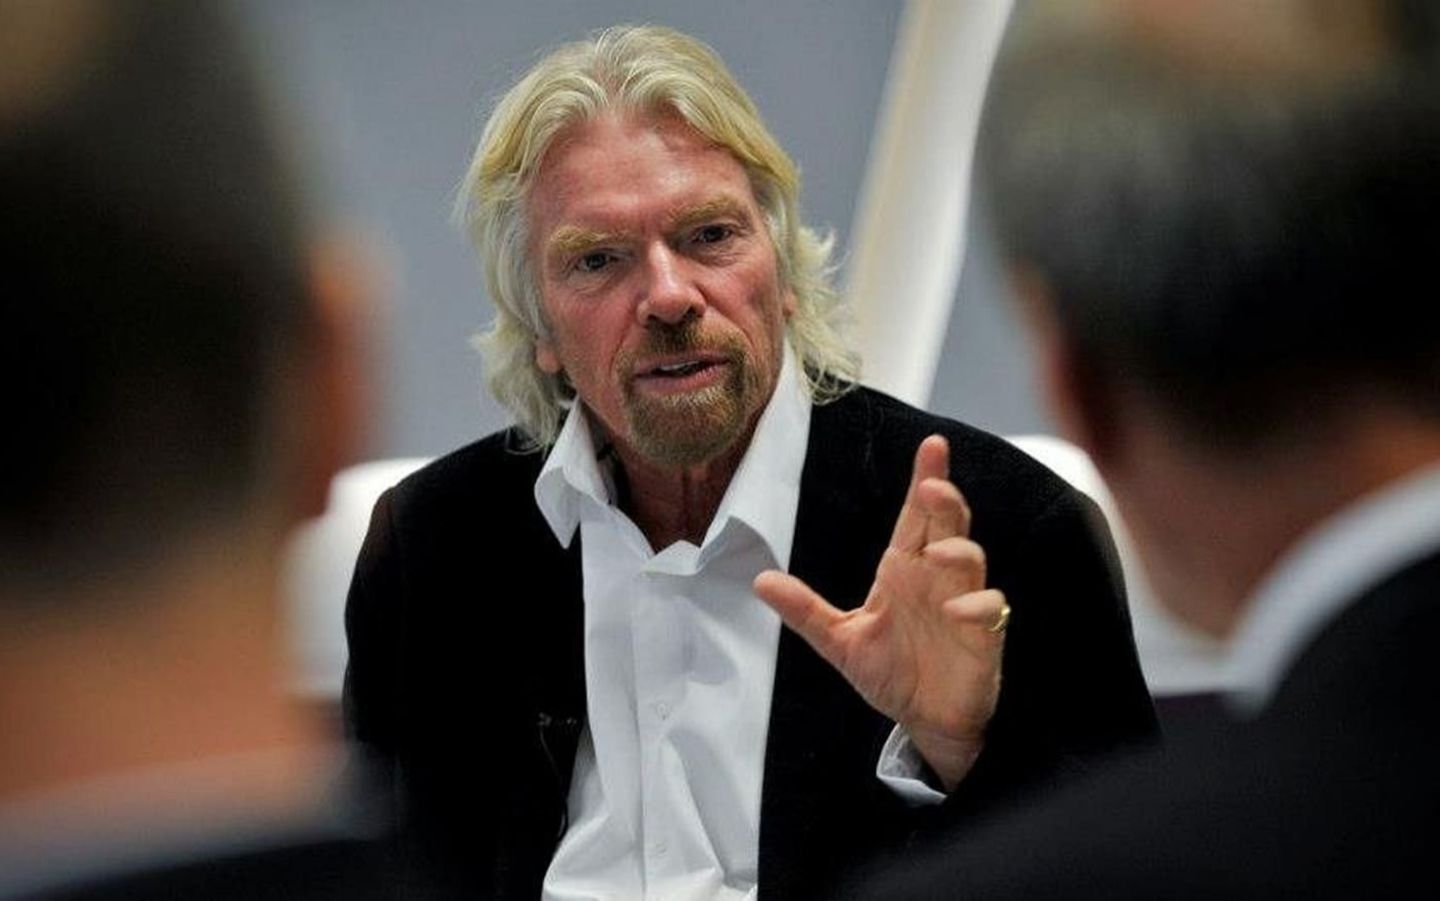 Richard Branson speaking to two men who have their backs to the camera